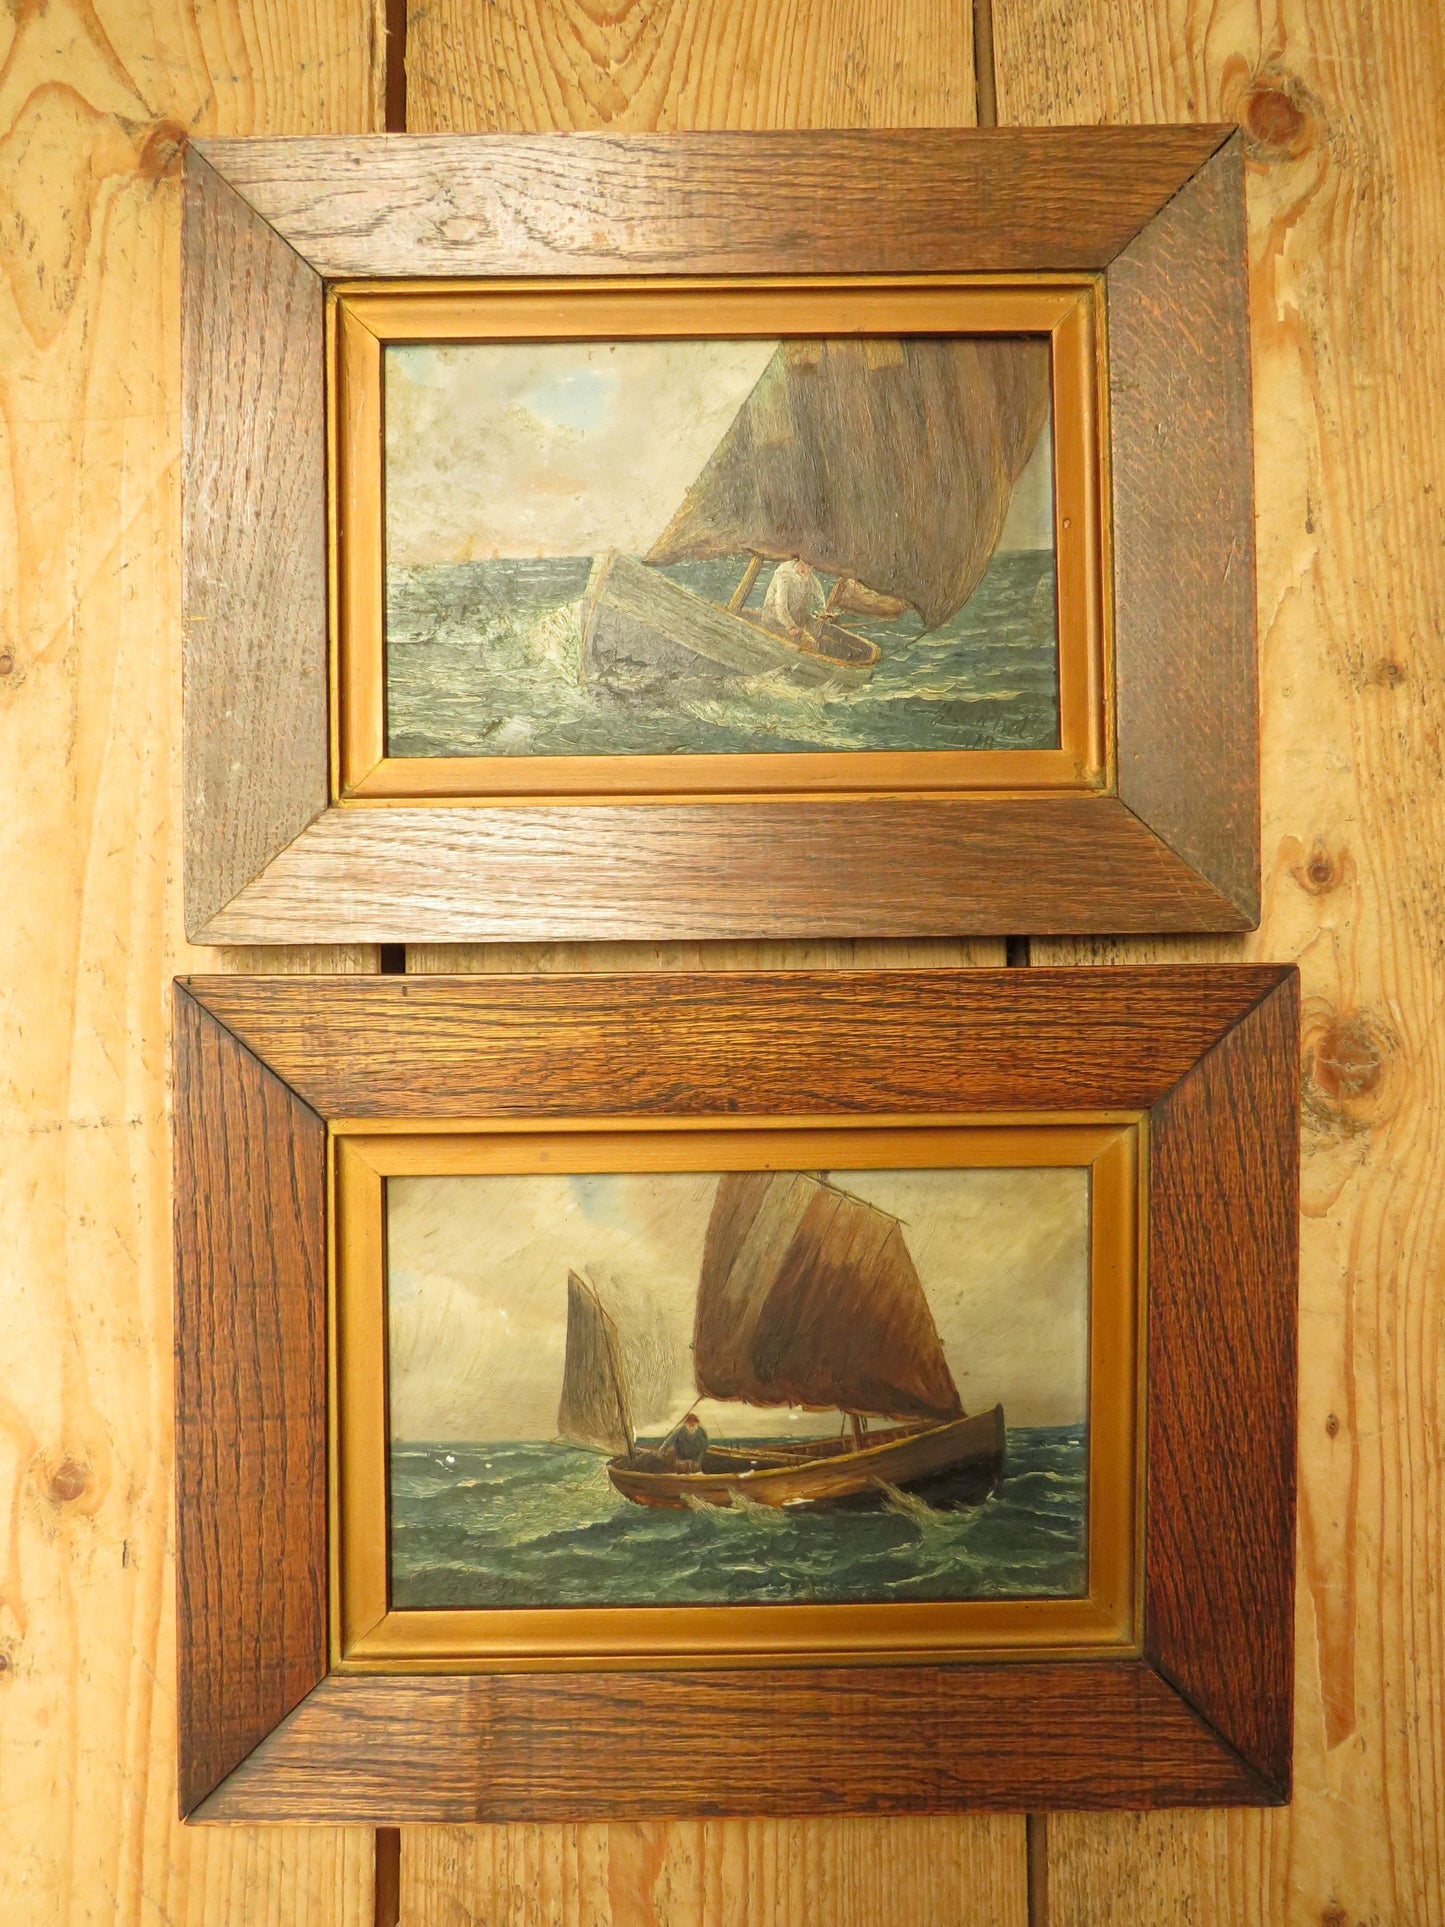 Naive Oil Paintings of Fishing Boats, signed J Nicol 1918